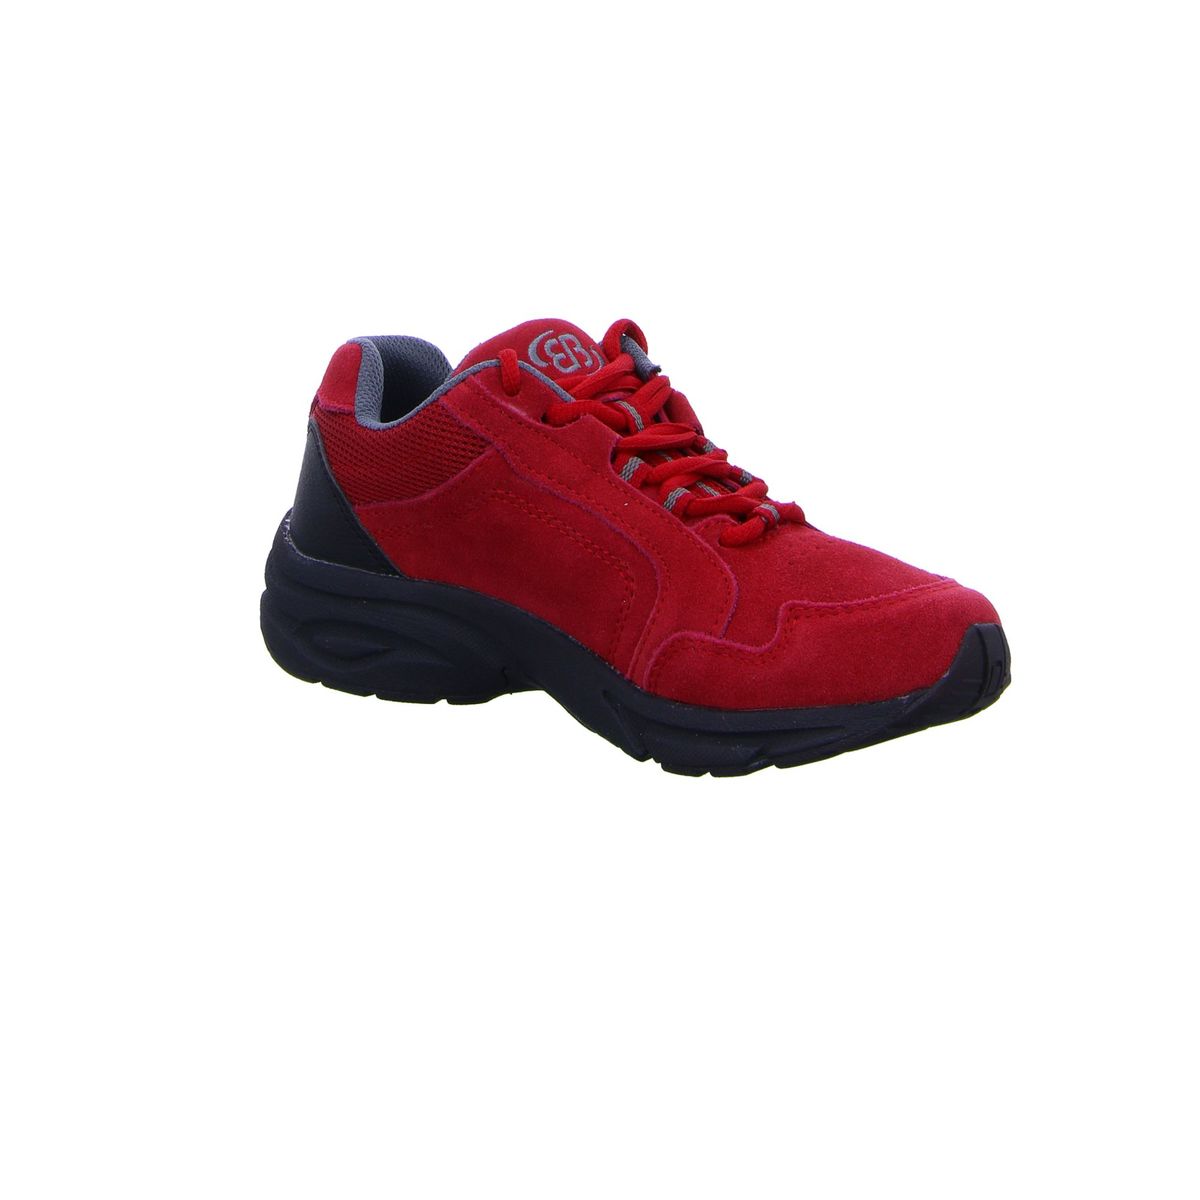 LICO Outdoorschuhe in Rot 